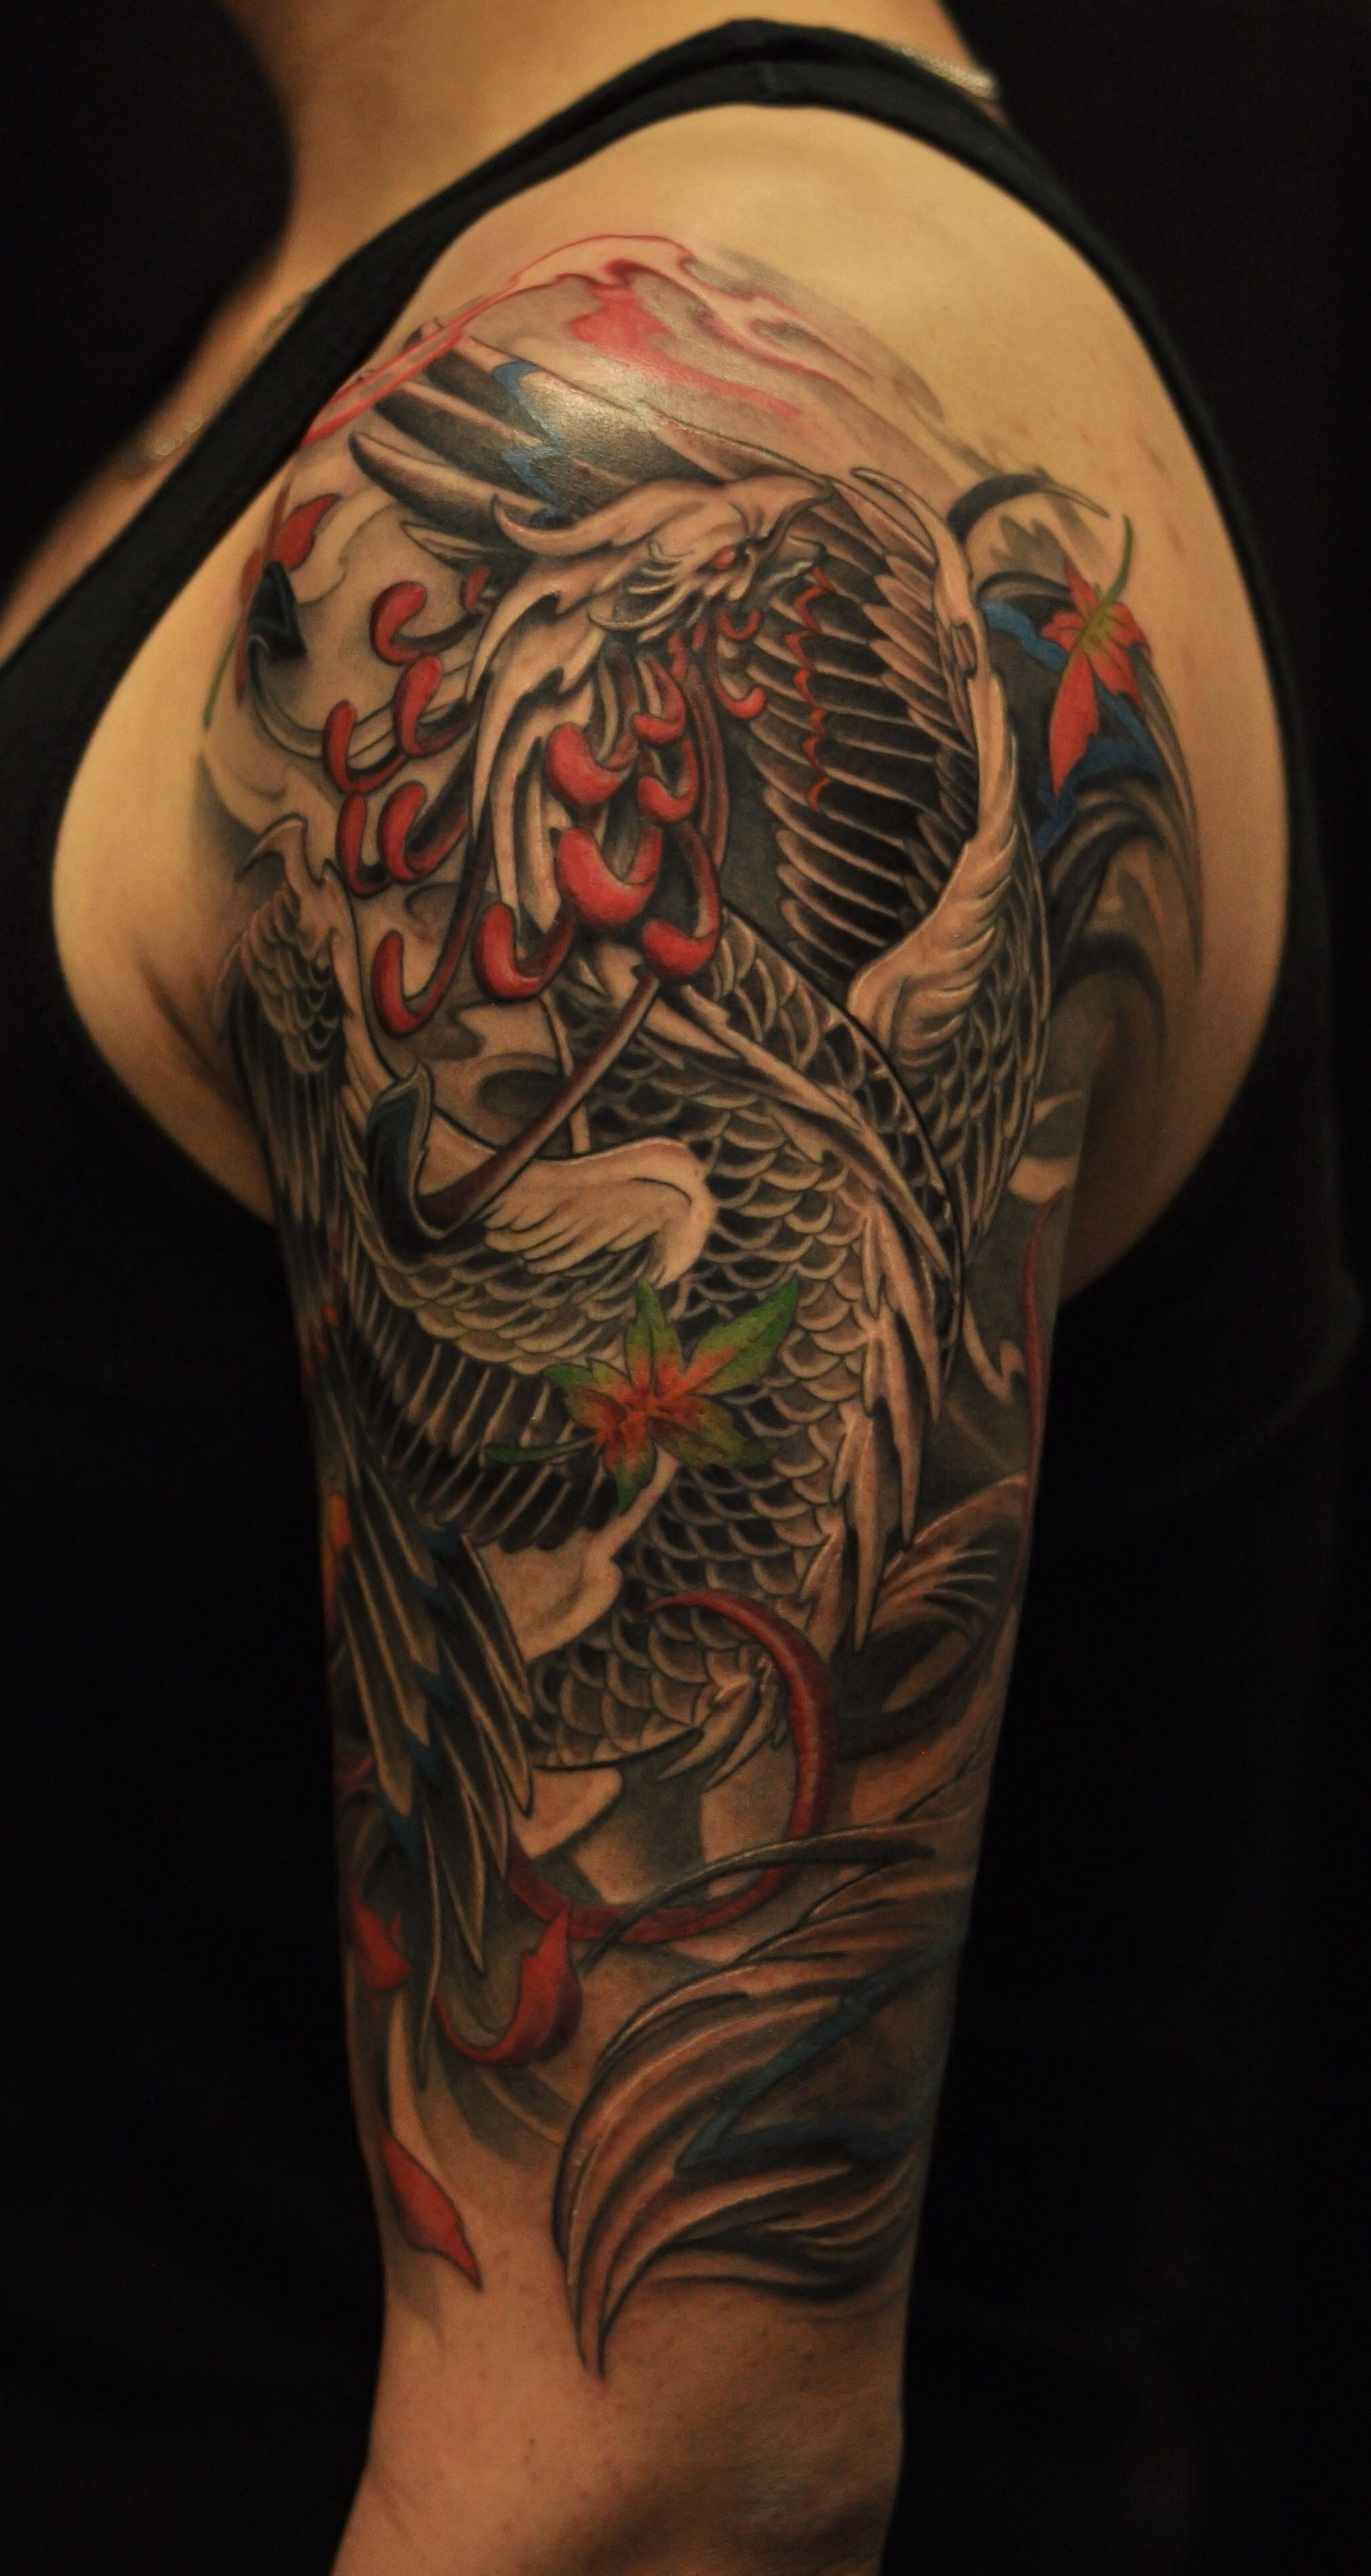 This Is One Of The Coolest Phoenix Tattoos Ive Seen Tattoo throughout dimensions 2022 X 3798